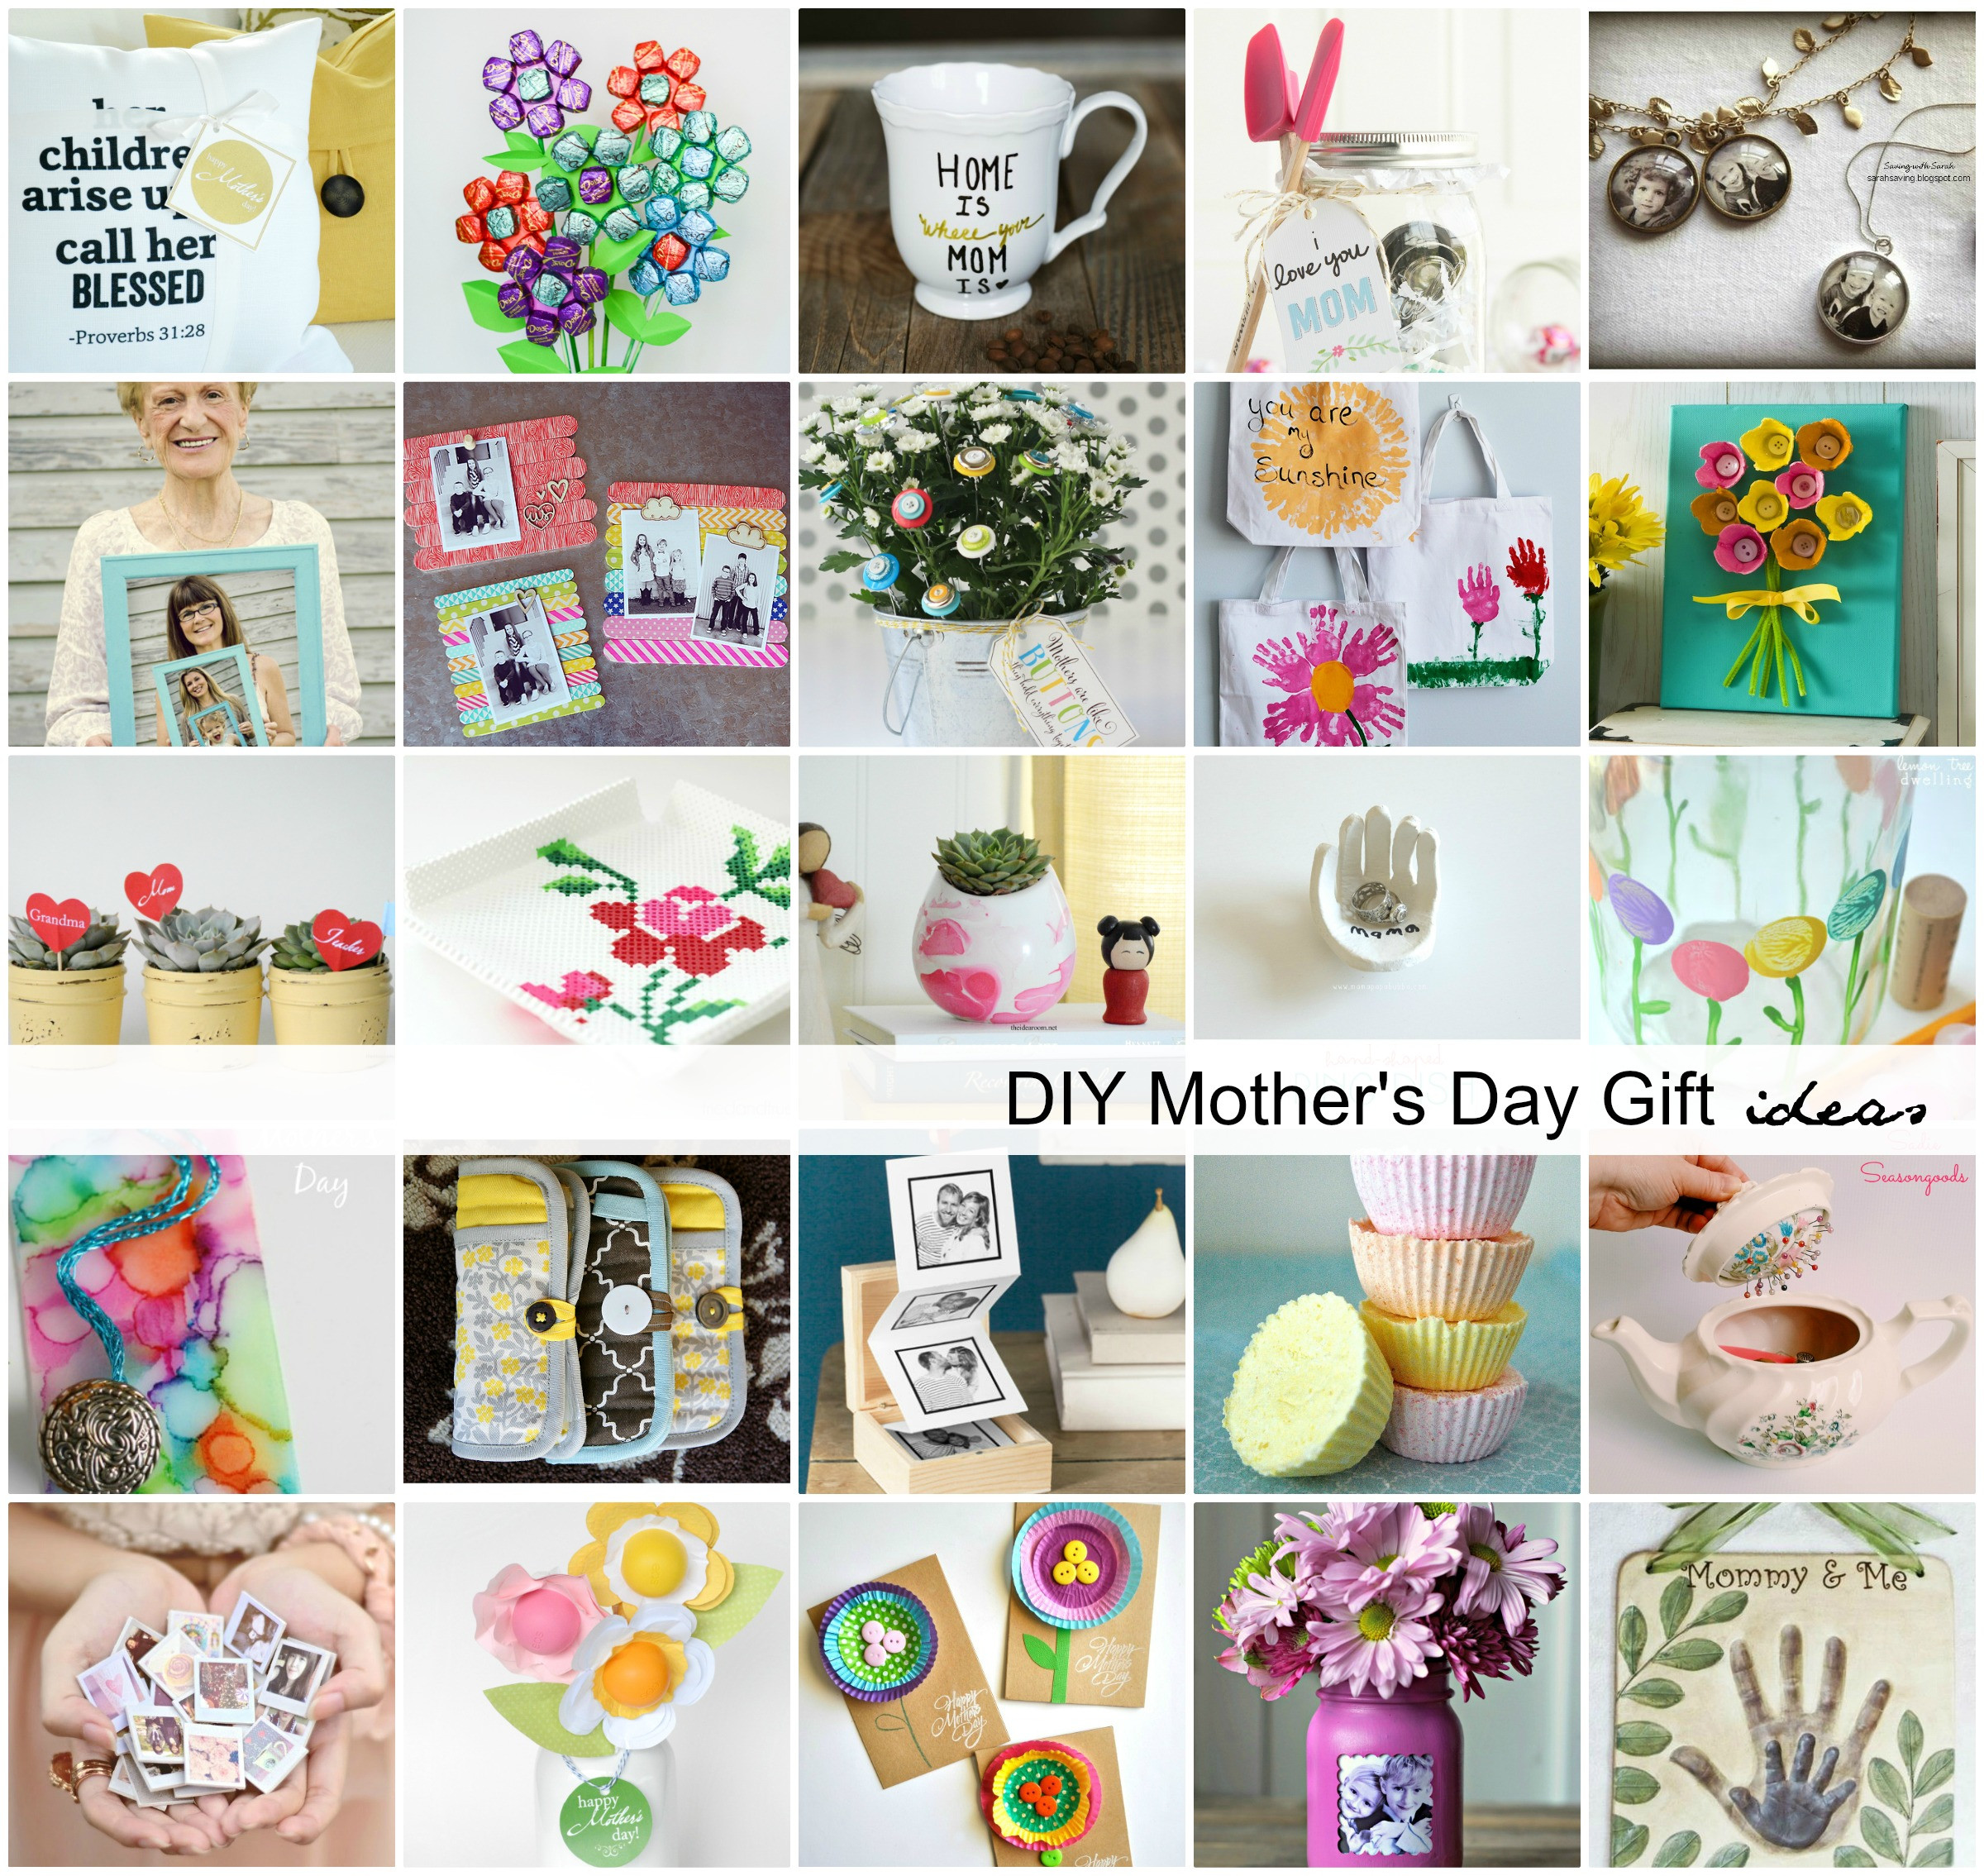 Mother Day Gift Ideas Handmade
 Handmade Mother s Day Gift Ideas The Idea Room